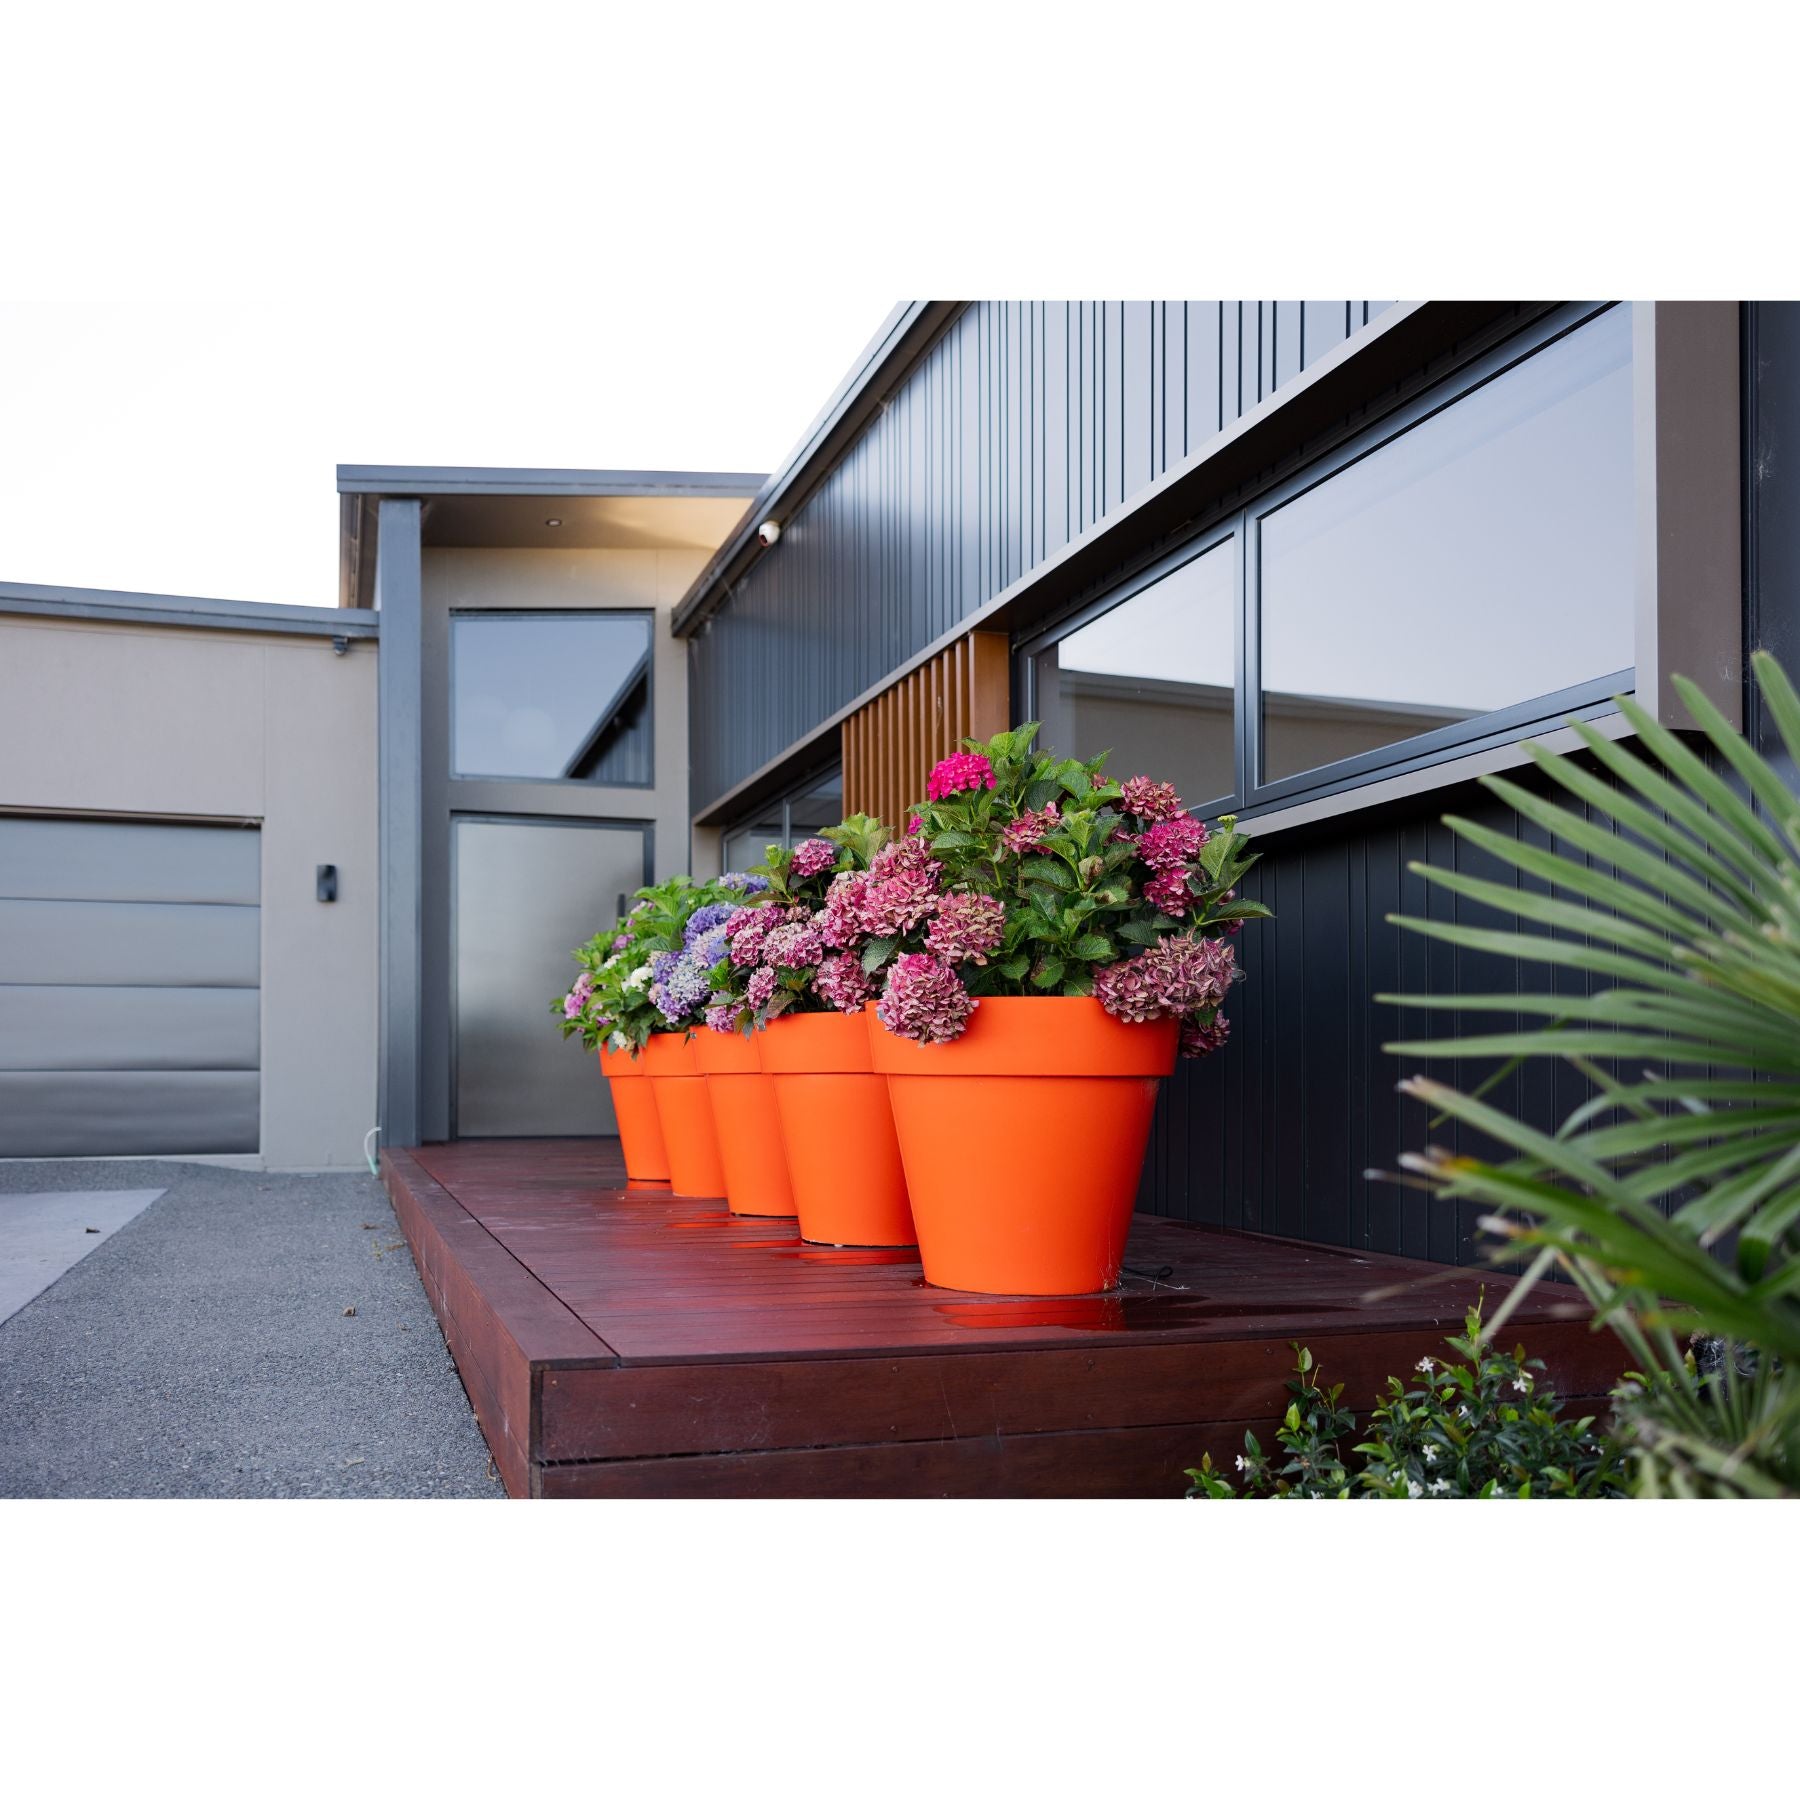 A cluster of five orange pots sitting on a deck. The pots were made by Modscene NZ.